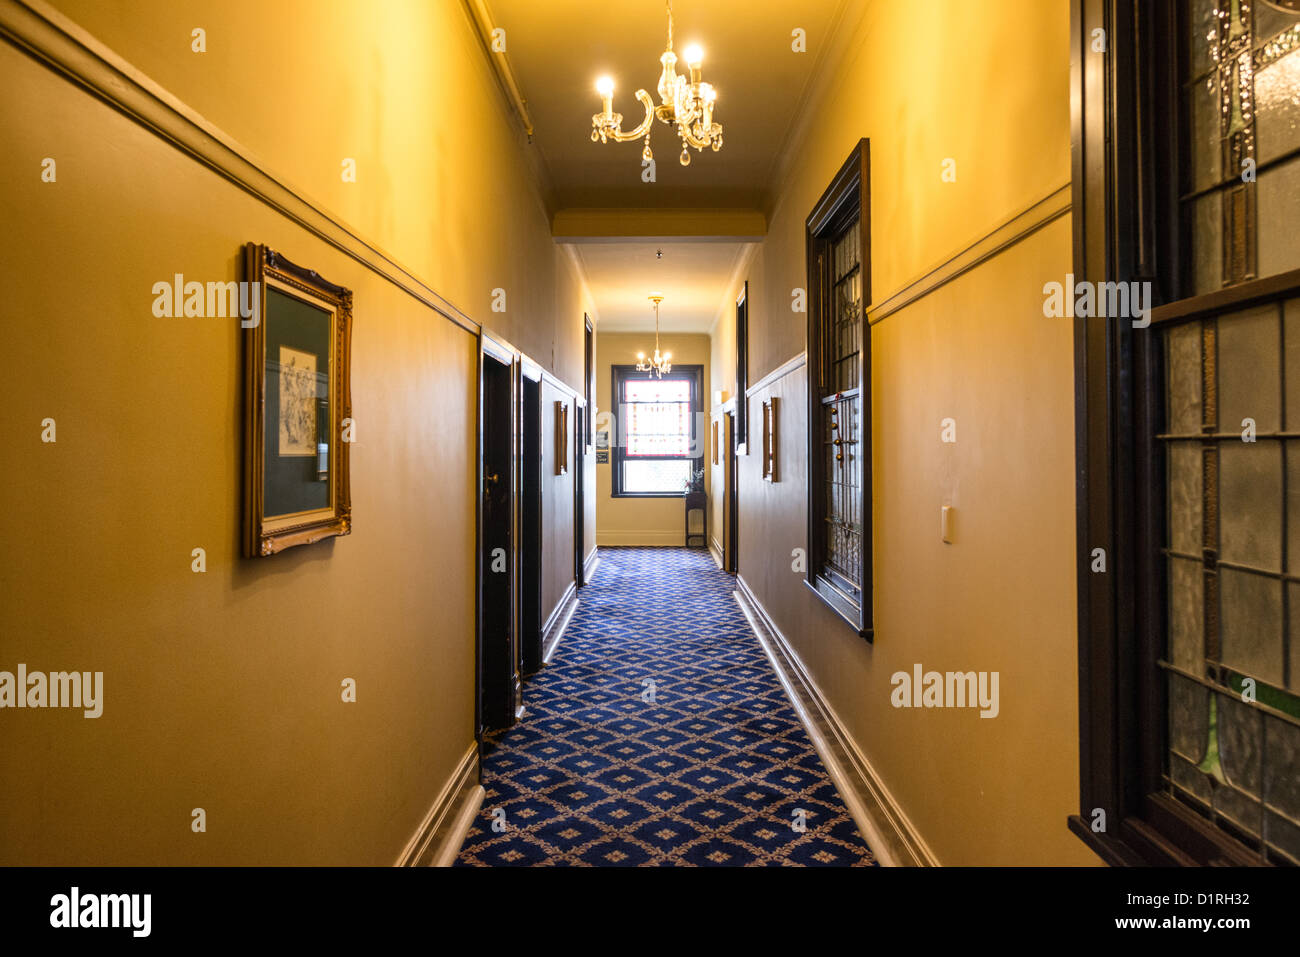 KATOOMBA, Australia - An corridor inside the historic Carrington Hotel in Katoomba in the Blue Mountains of New South Wales, Australia. The Carrington is an historic hotel established in 1880. Stock Photo